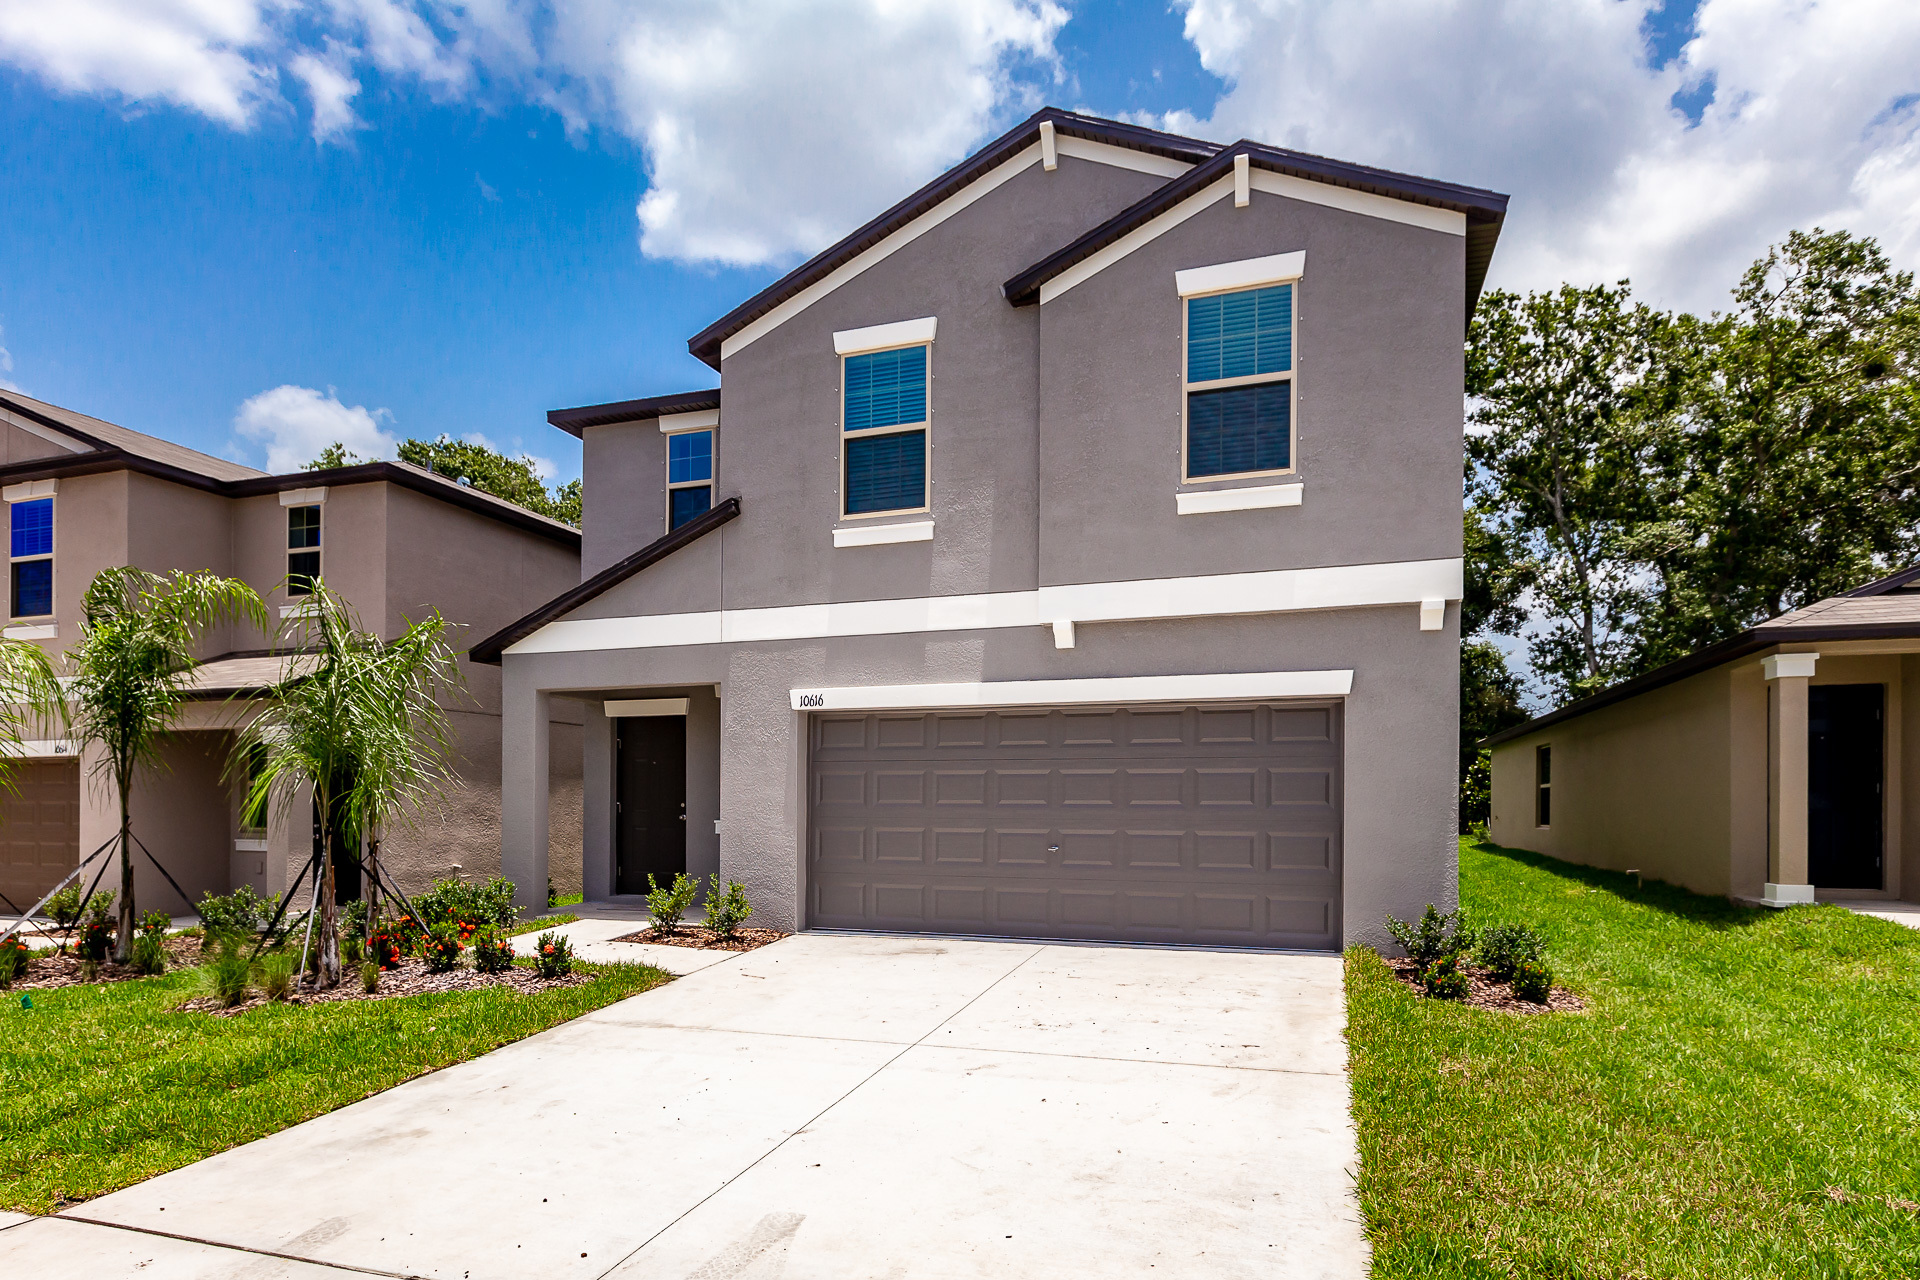 Courtesy. Lafayette Real Estate is developing several single-family home rental projects in the region, including this one, in  Preserve at Pine Grove community in Riverview, Hillsborough County.